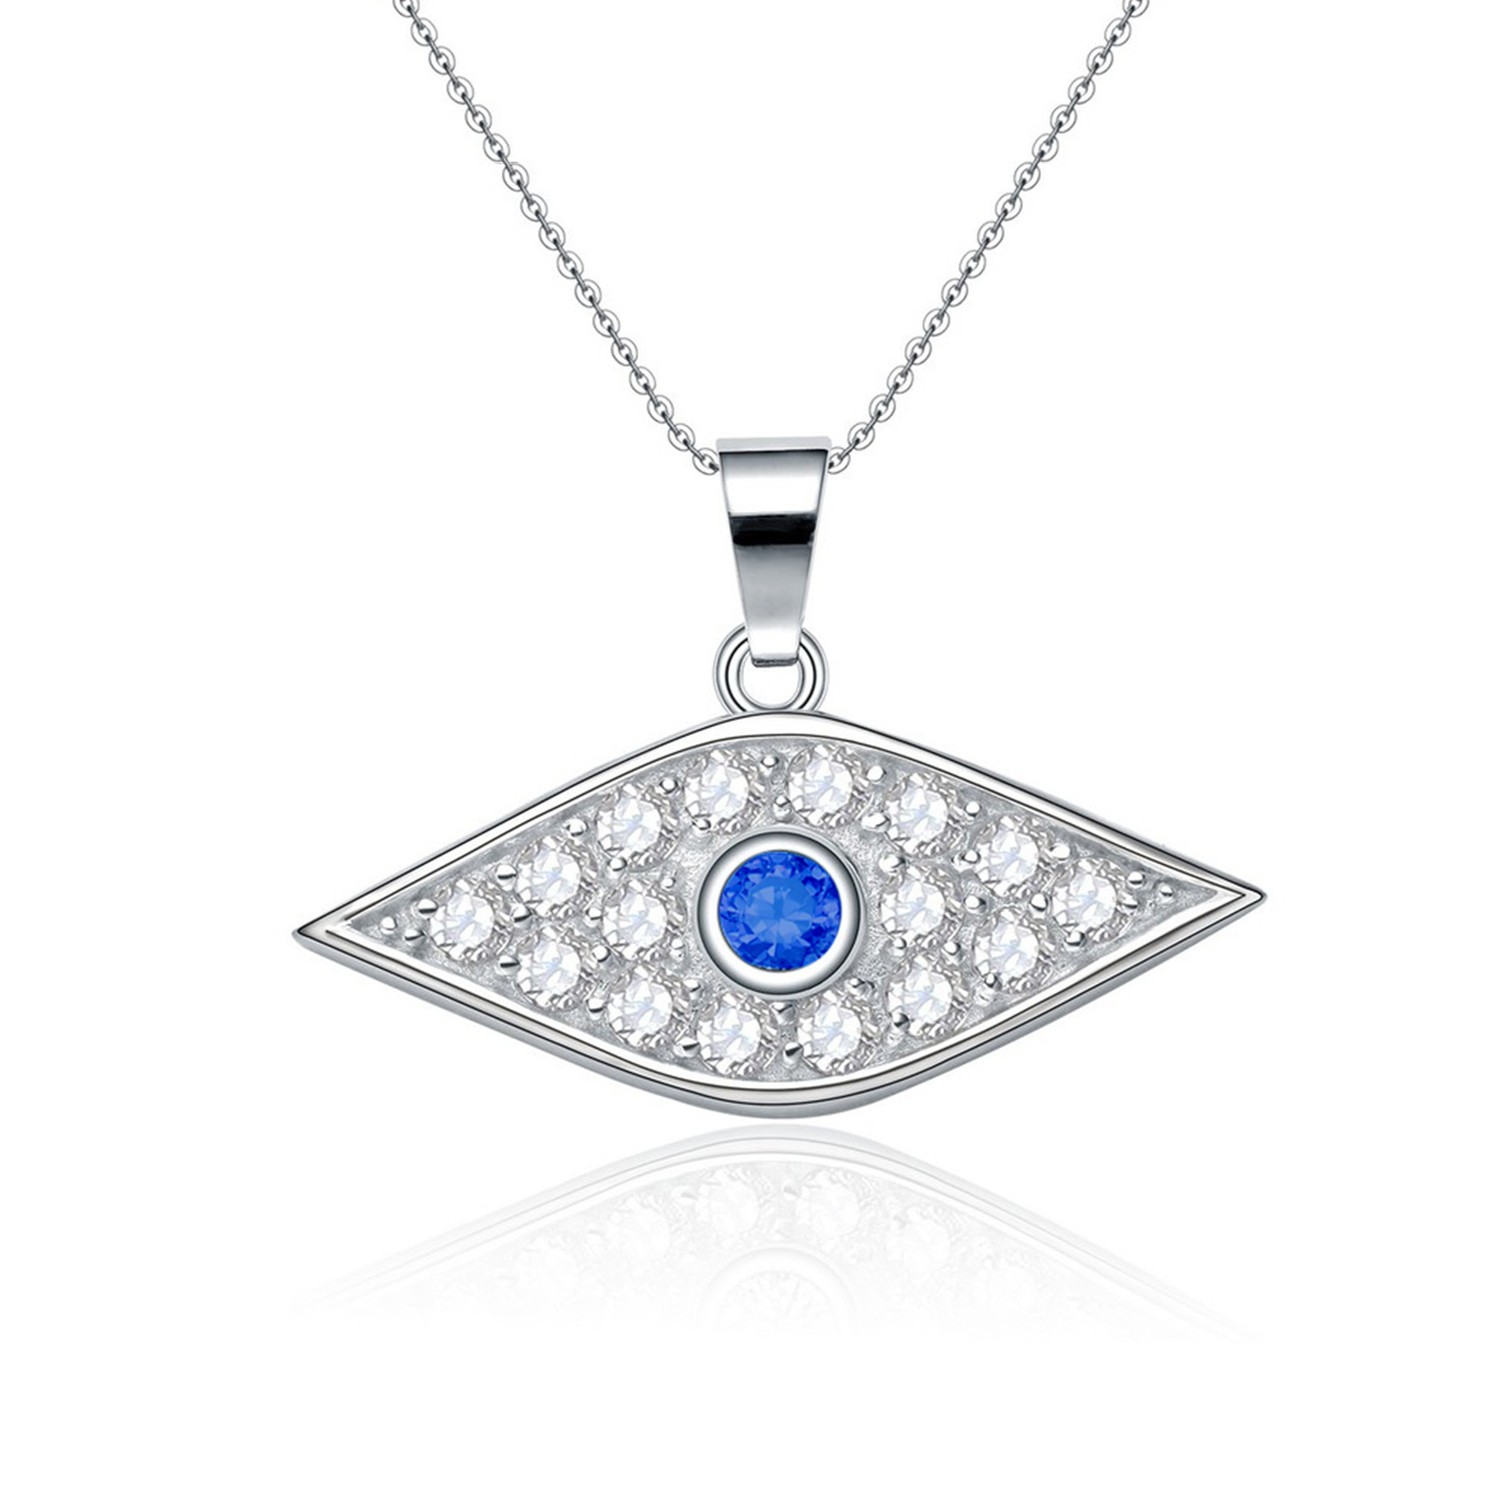 Factory Necklace Jewelry women 925 Sterling Silver Cubic Zirconia Blue White CZ Pendant Eye Necklace